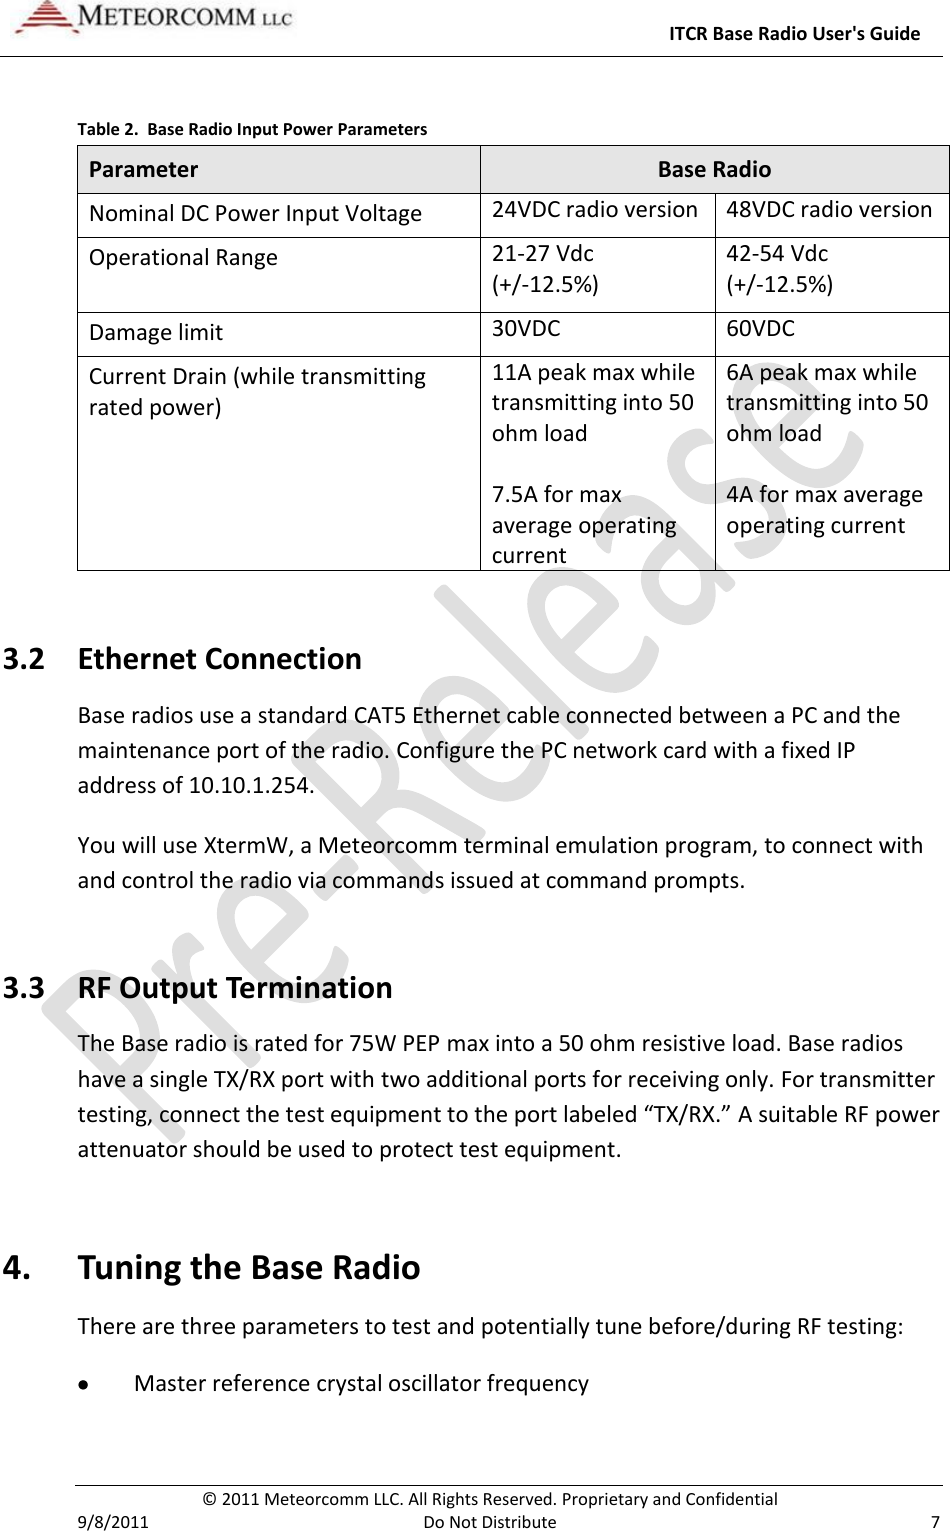     ITCR Base Radio User&apos;s Guide   © 2011 Meteorcomm LLC. All Rights Reserved. Proprietary and Confidential   9/8/2011  Do Not Distribute  7  Table 2.  Base Radio Input Power Parameters Parameter Base Radio Nominal DC Power Input Voltage 24VDC radio version 48VDC radio version Operational Range 21-27 Vdc (+/-12.5%) 42-54 Vdc (+/-12.5%) Damage limit 30VDC 60VDC Current Drain (while transmitting rated power) 11A peak max while transmitting into 50 ohm load  7.5A for max average operating current 6A peak max while transmitting into 50 ohm load  4A for max average operating current 3.2 Ethernet Connection Base radios use a standard CAT5 Ethernet cable connected between a PC and the maintenance port of the radio. Configure the PC network card with a fixed IP address of 10.10.1.254. You will use XtermW, a Meteorcomm terminal emulation program, to connect with and control the radio via commands issued at command prompts.  3.3 RF Output Termination The Base radio is rated for 75W PEP max into a 50 ohm resistive load. Base radios have a single TX/RX port with two additional ports for receiving only. For transmitter testing, connect the test equipment to the port labeled “TX/RX.” A suitable RF power attenuator should be used to protect test equipment. 4. Tuning the Base Radio There are three parameters to test and potentially tune before/during RF testing:  Master reference crystal oscillator frequency 